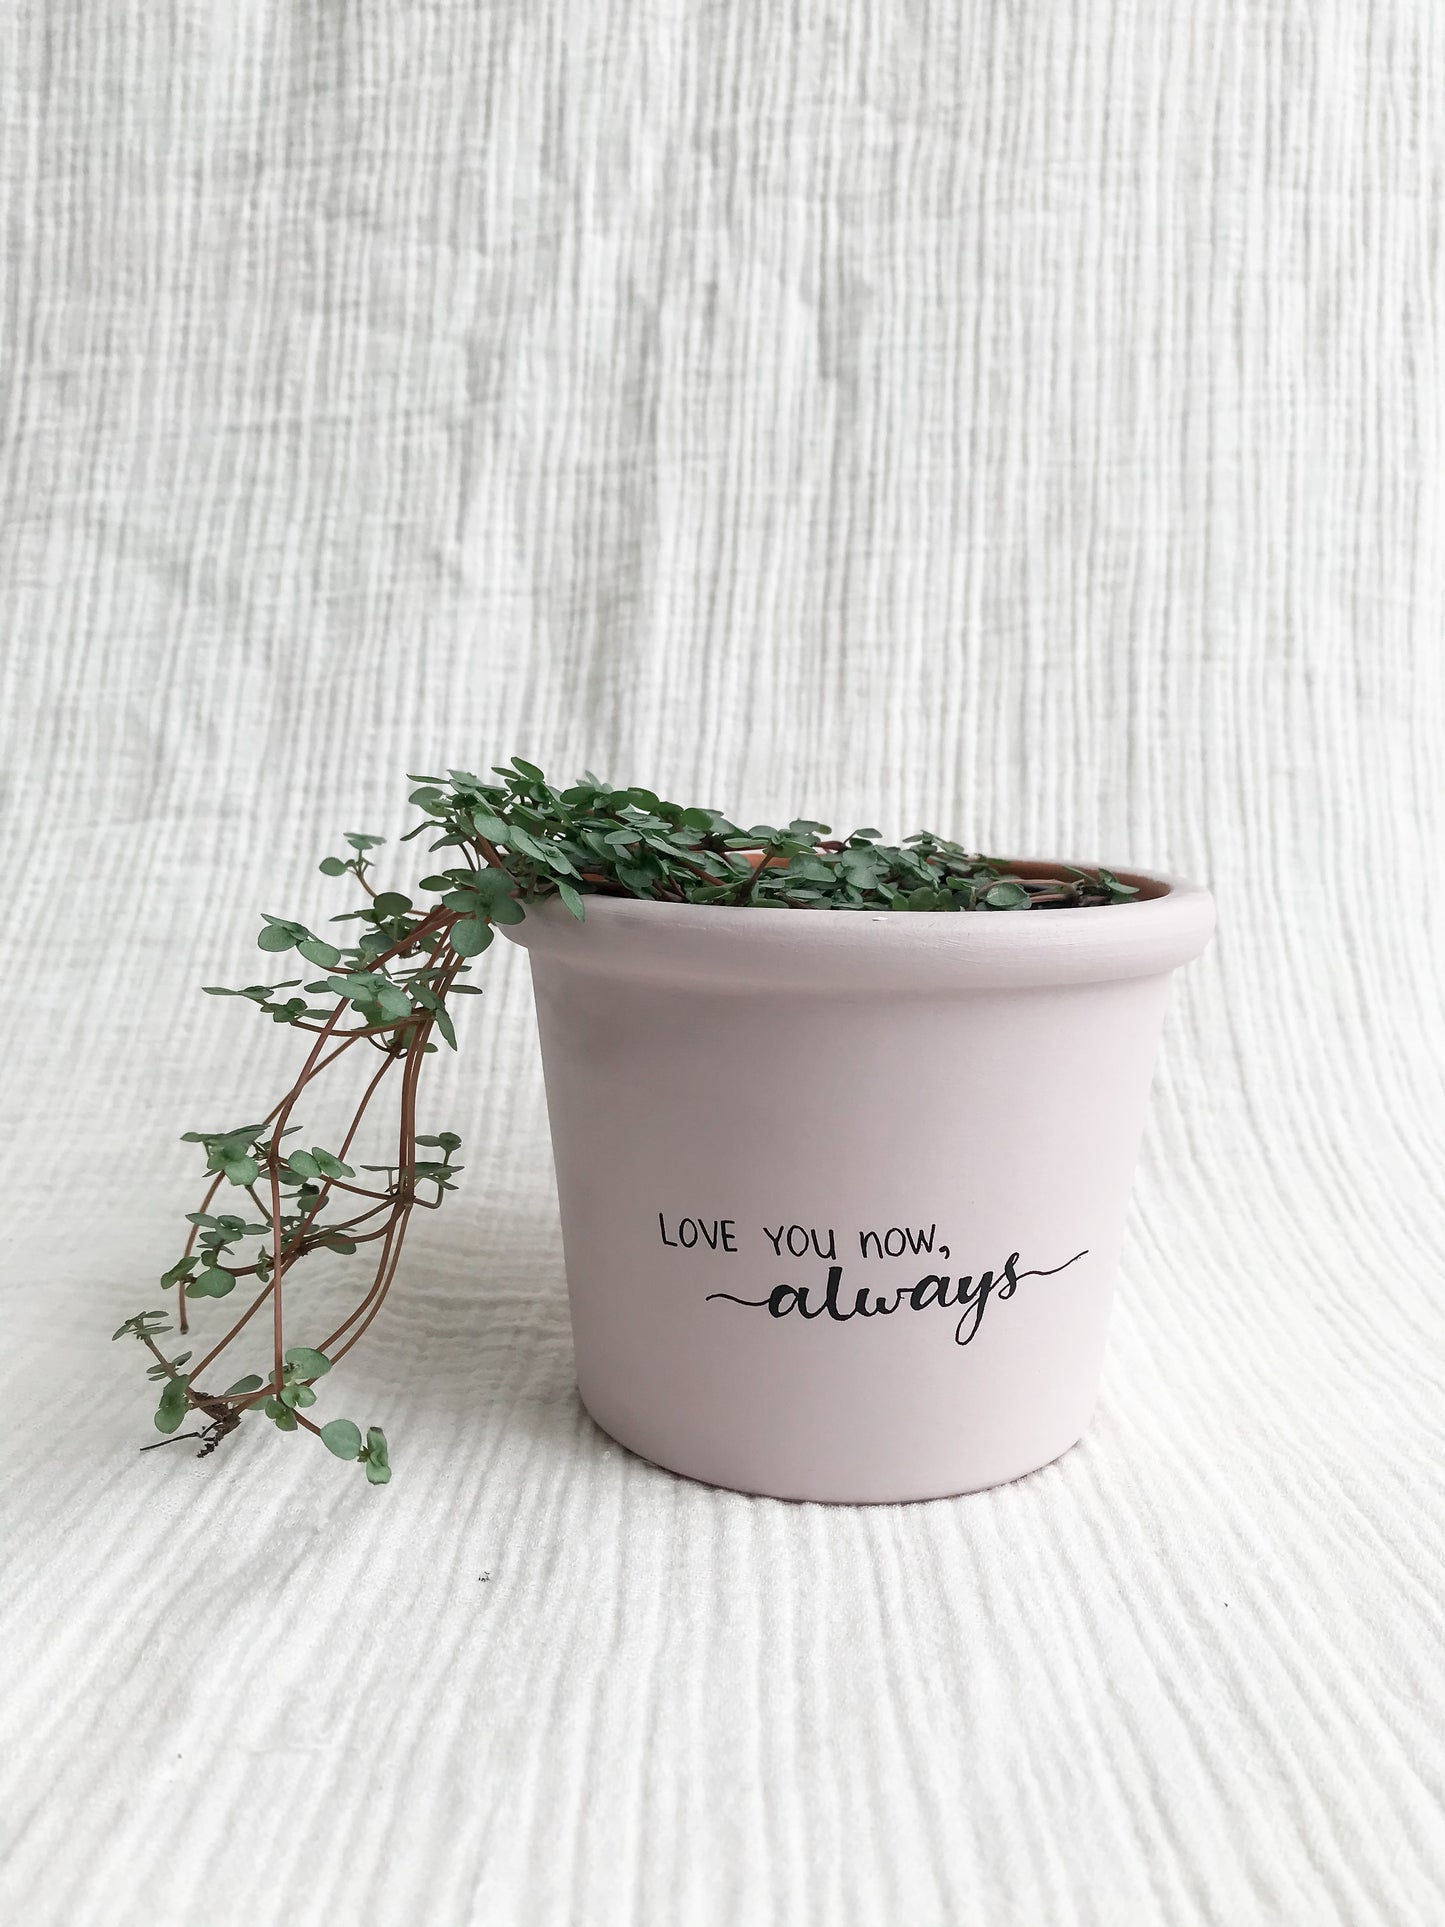 Love you now and always | Hand Painted Terracotta Pot with Drainage Hole | Ready to Ship